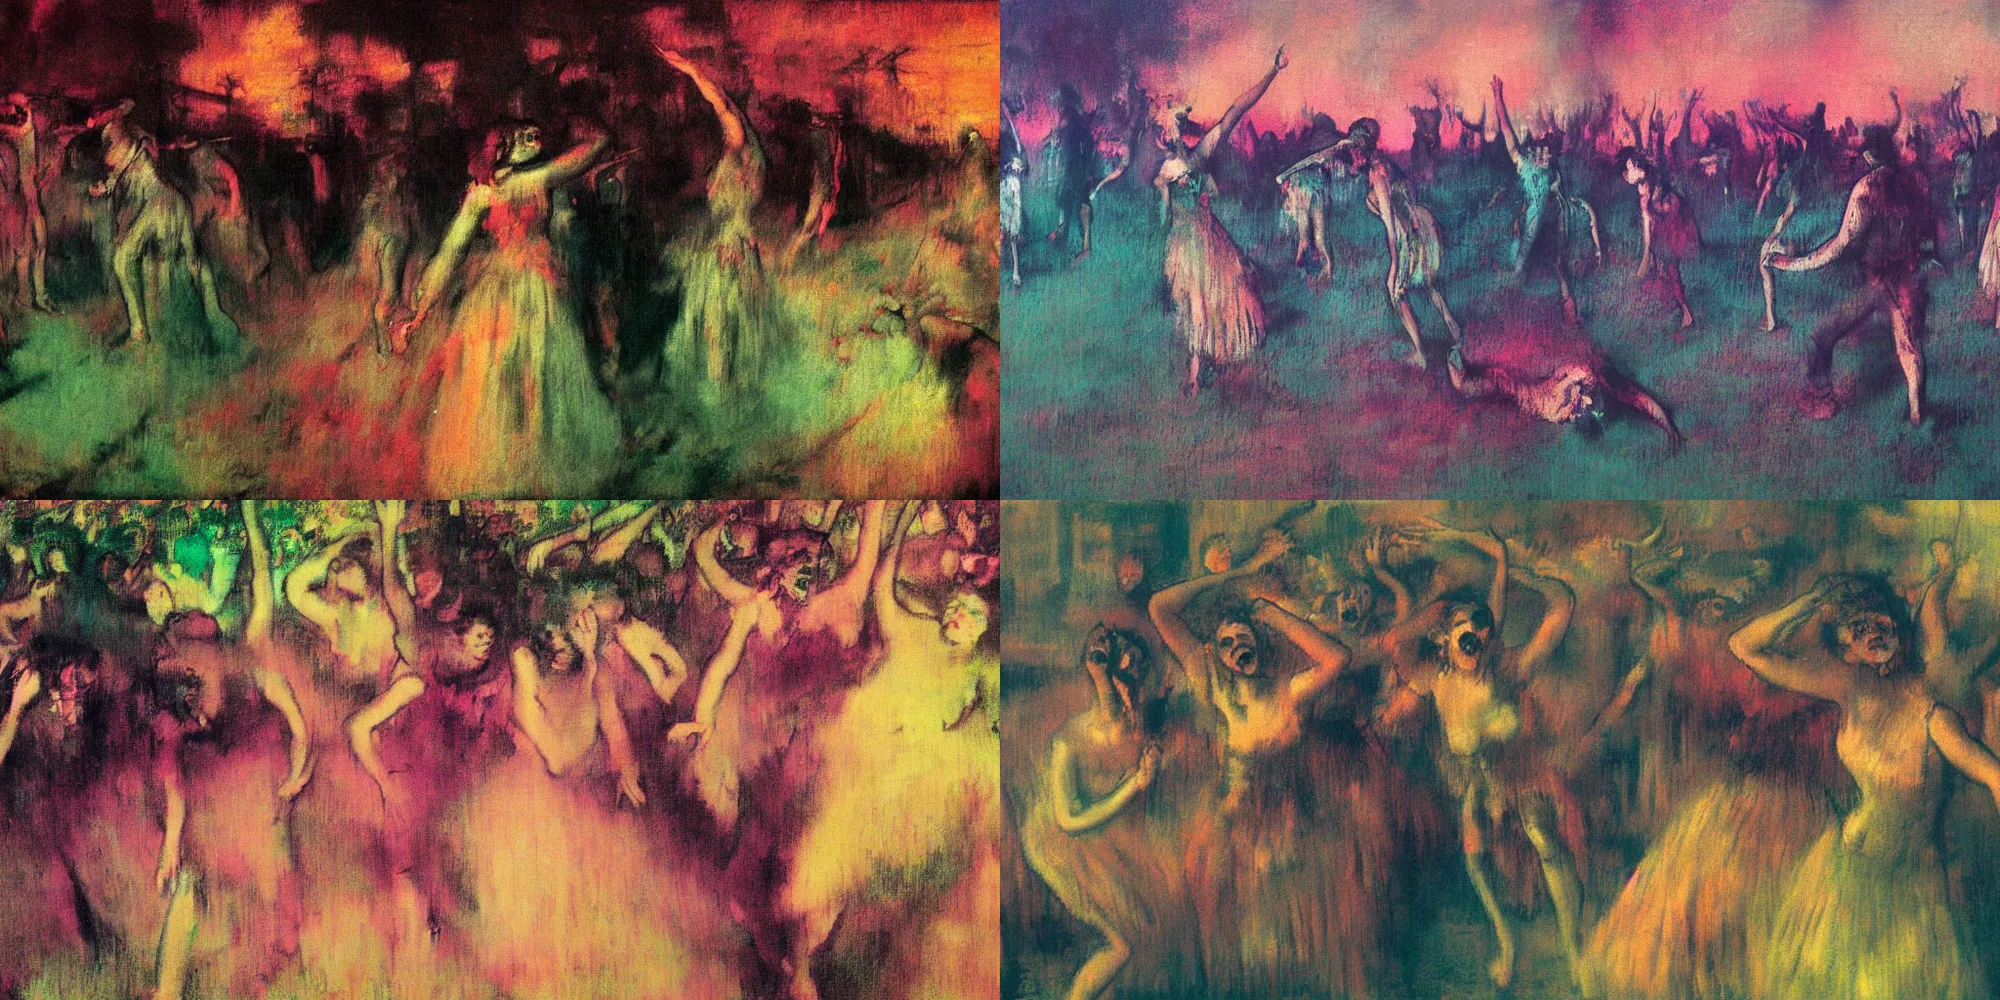 Prompt: A synthwave zombie apocalypse painted by Edgar Degas